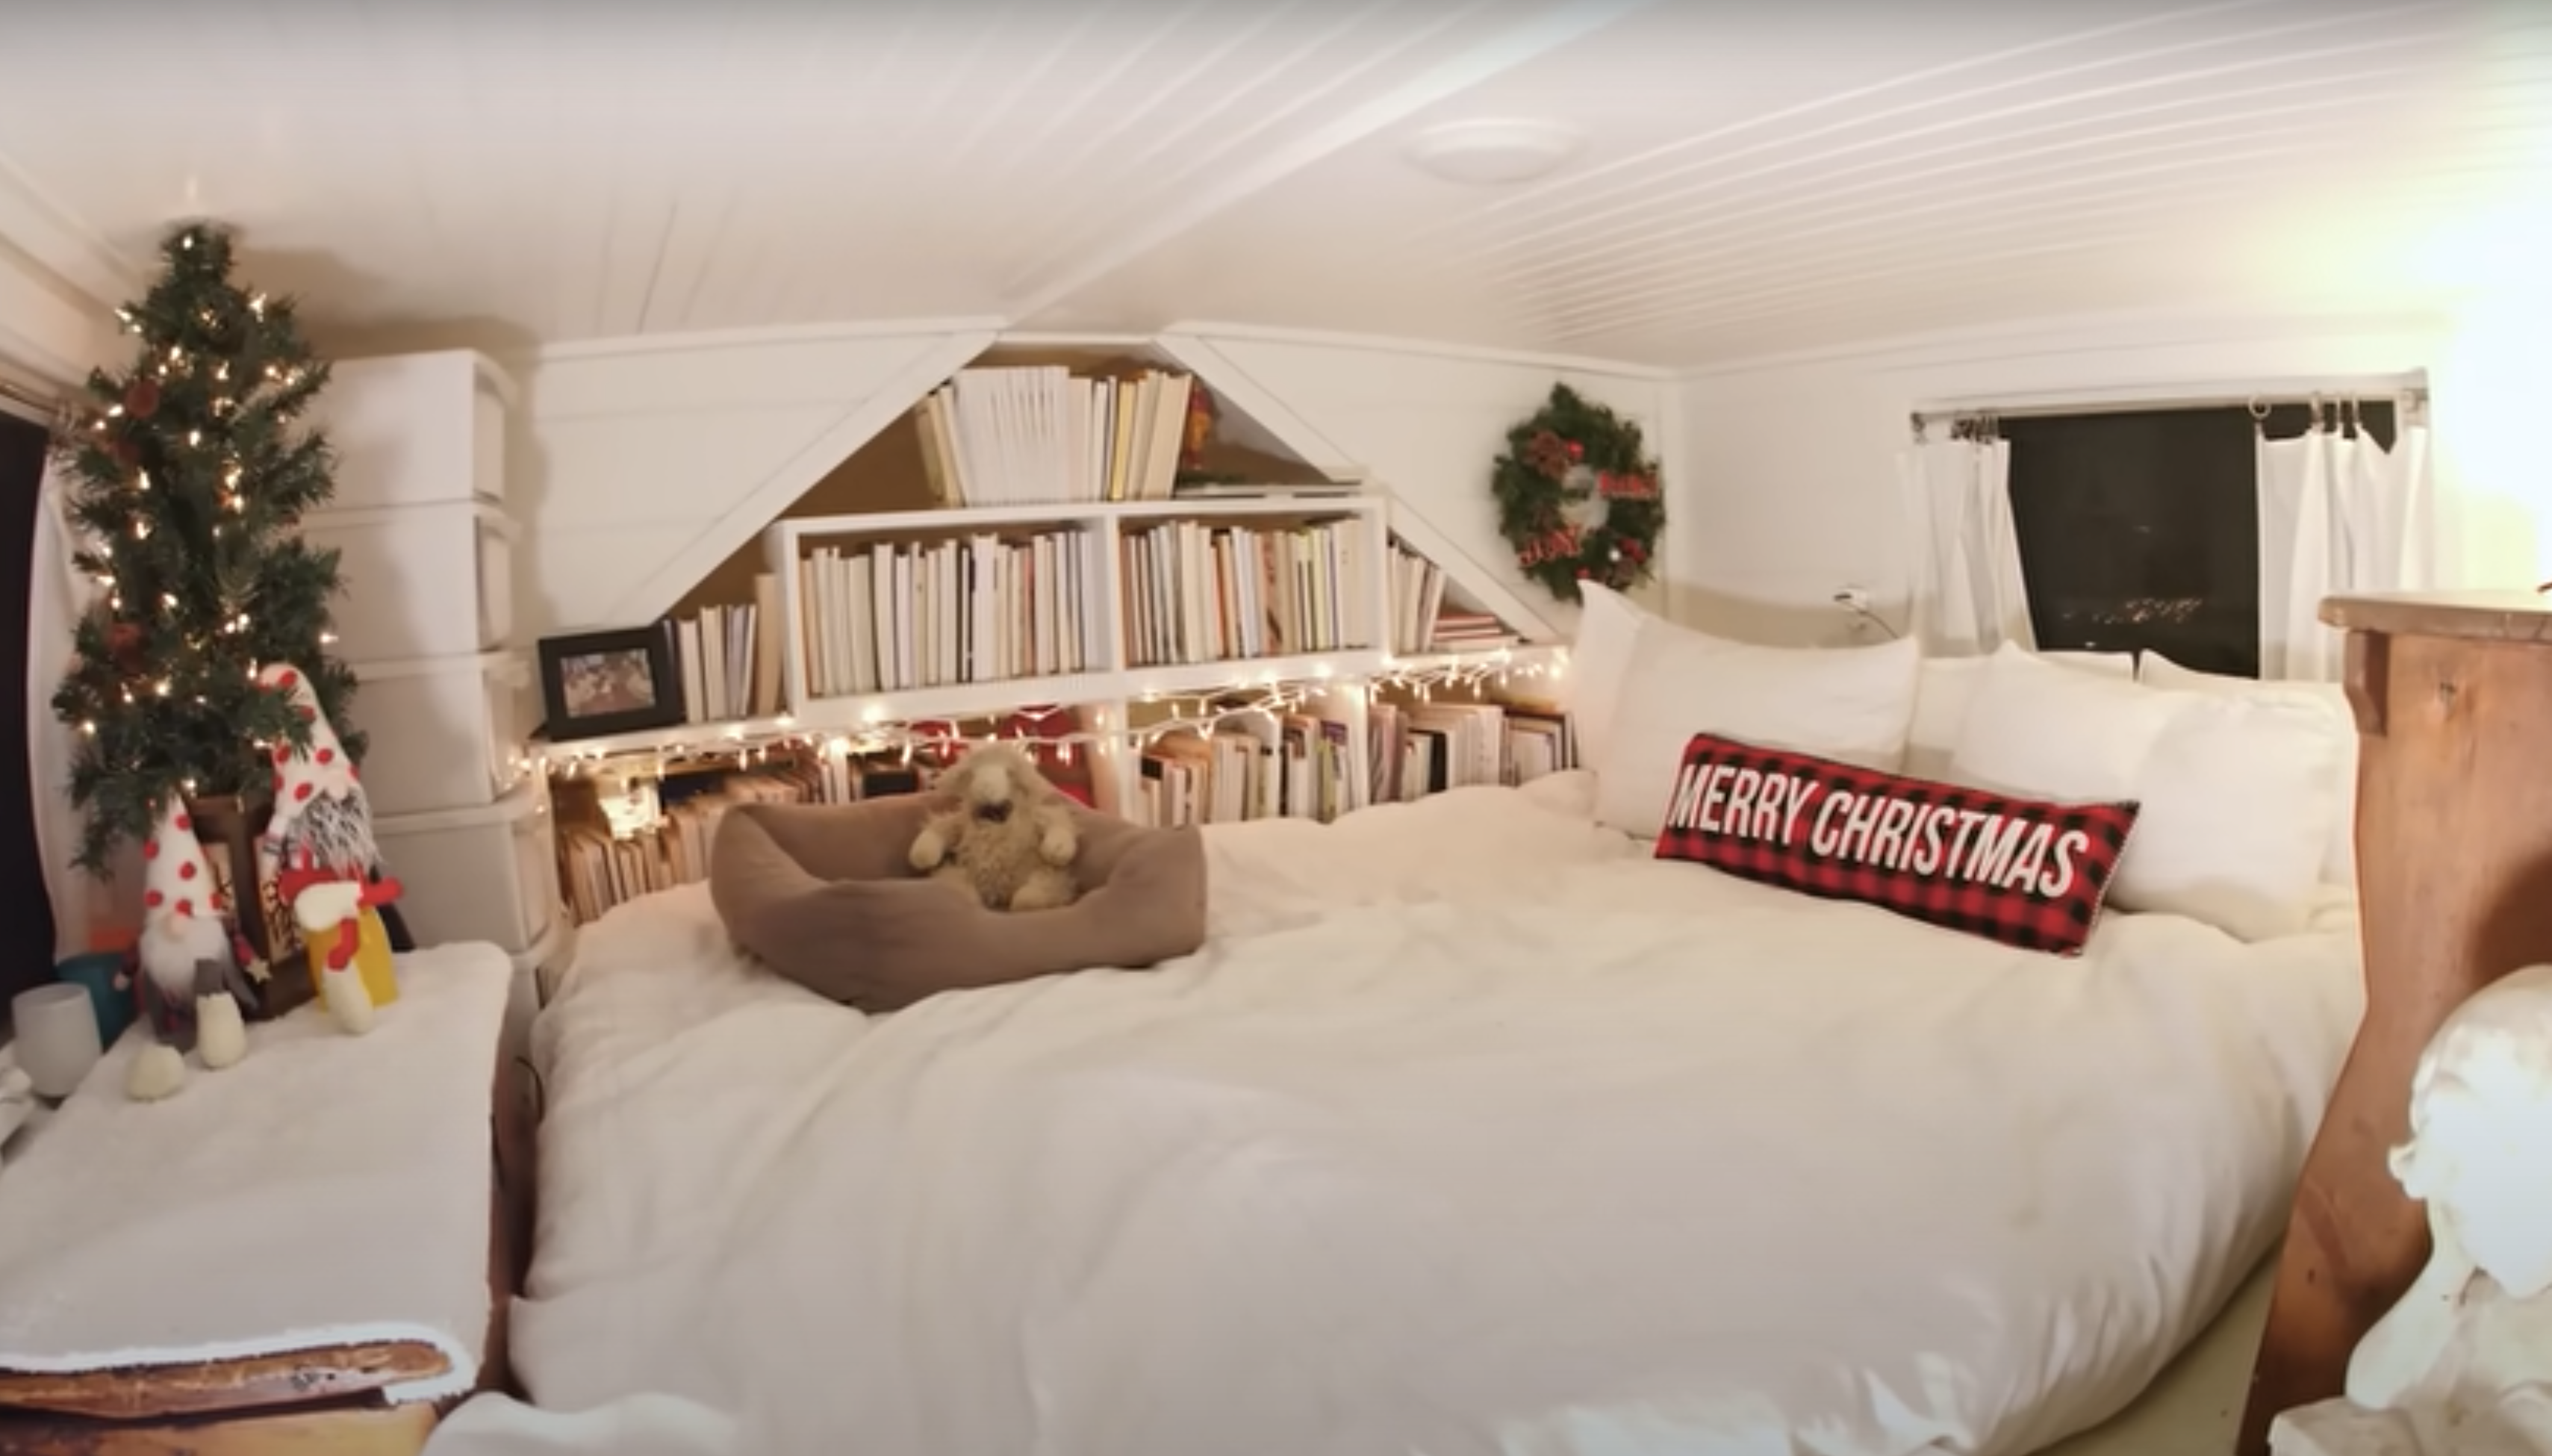 tiny house loft bedroom with decorations and book shelves